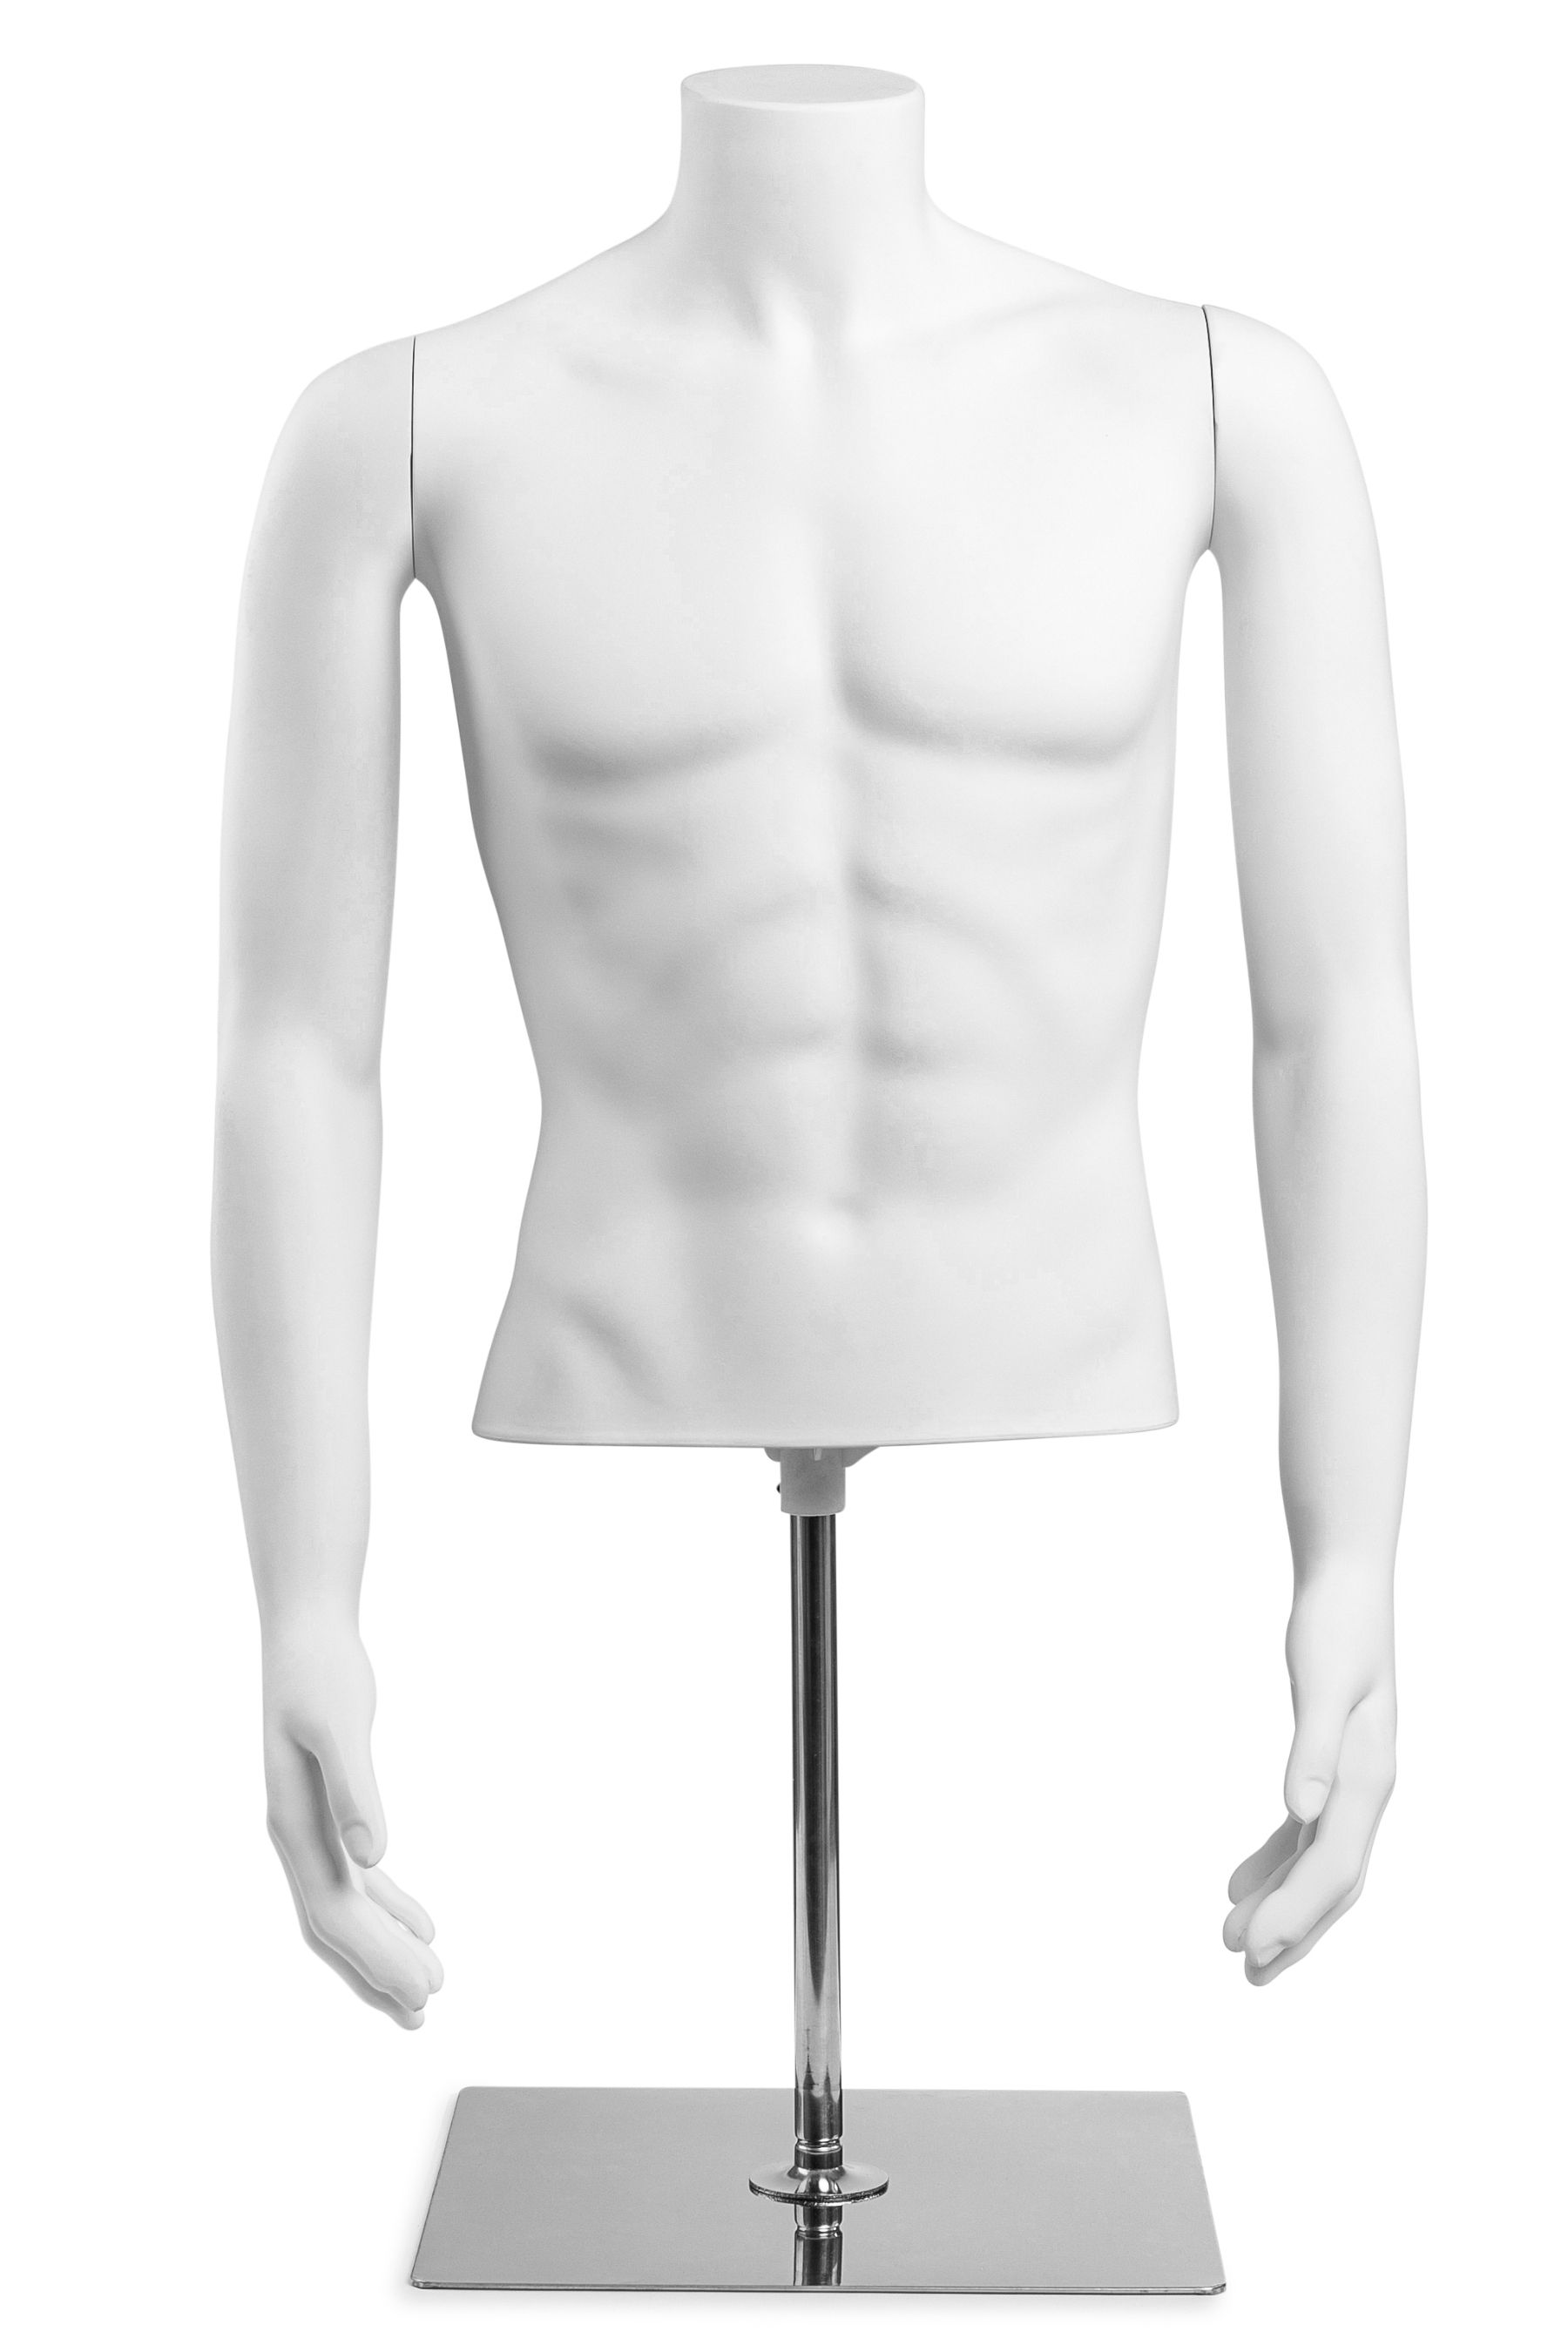 Matte White Torso Form STM050WT Details about   47 in Tall Male Headless Sitting Mannequin NEW 